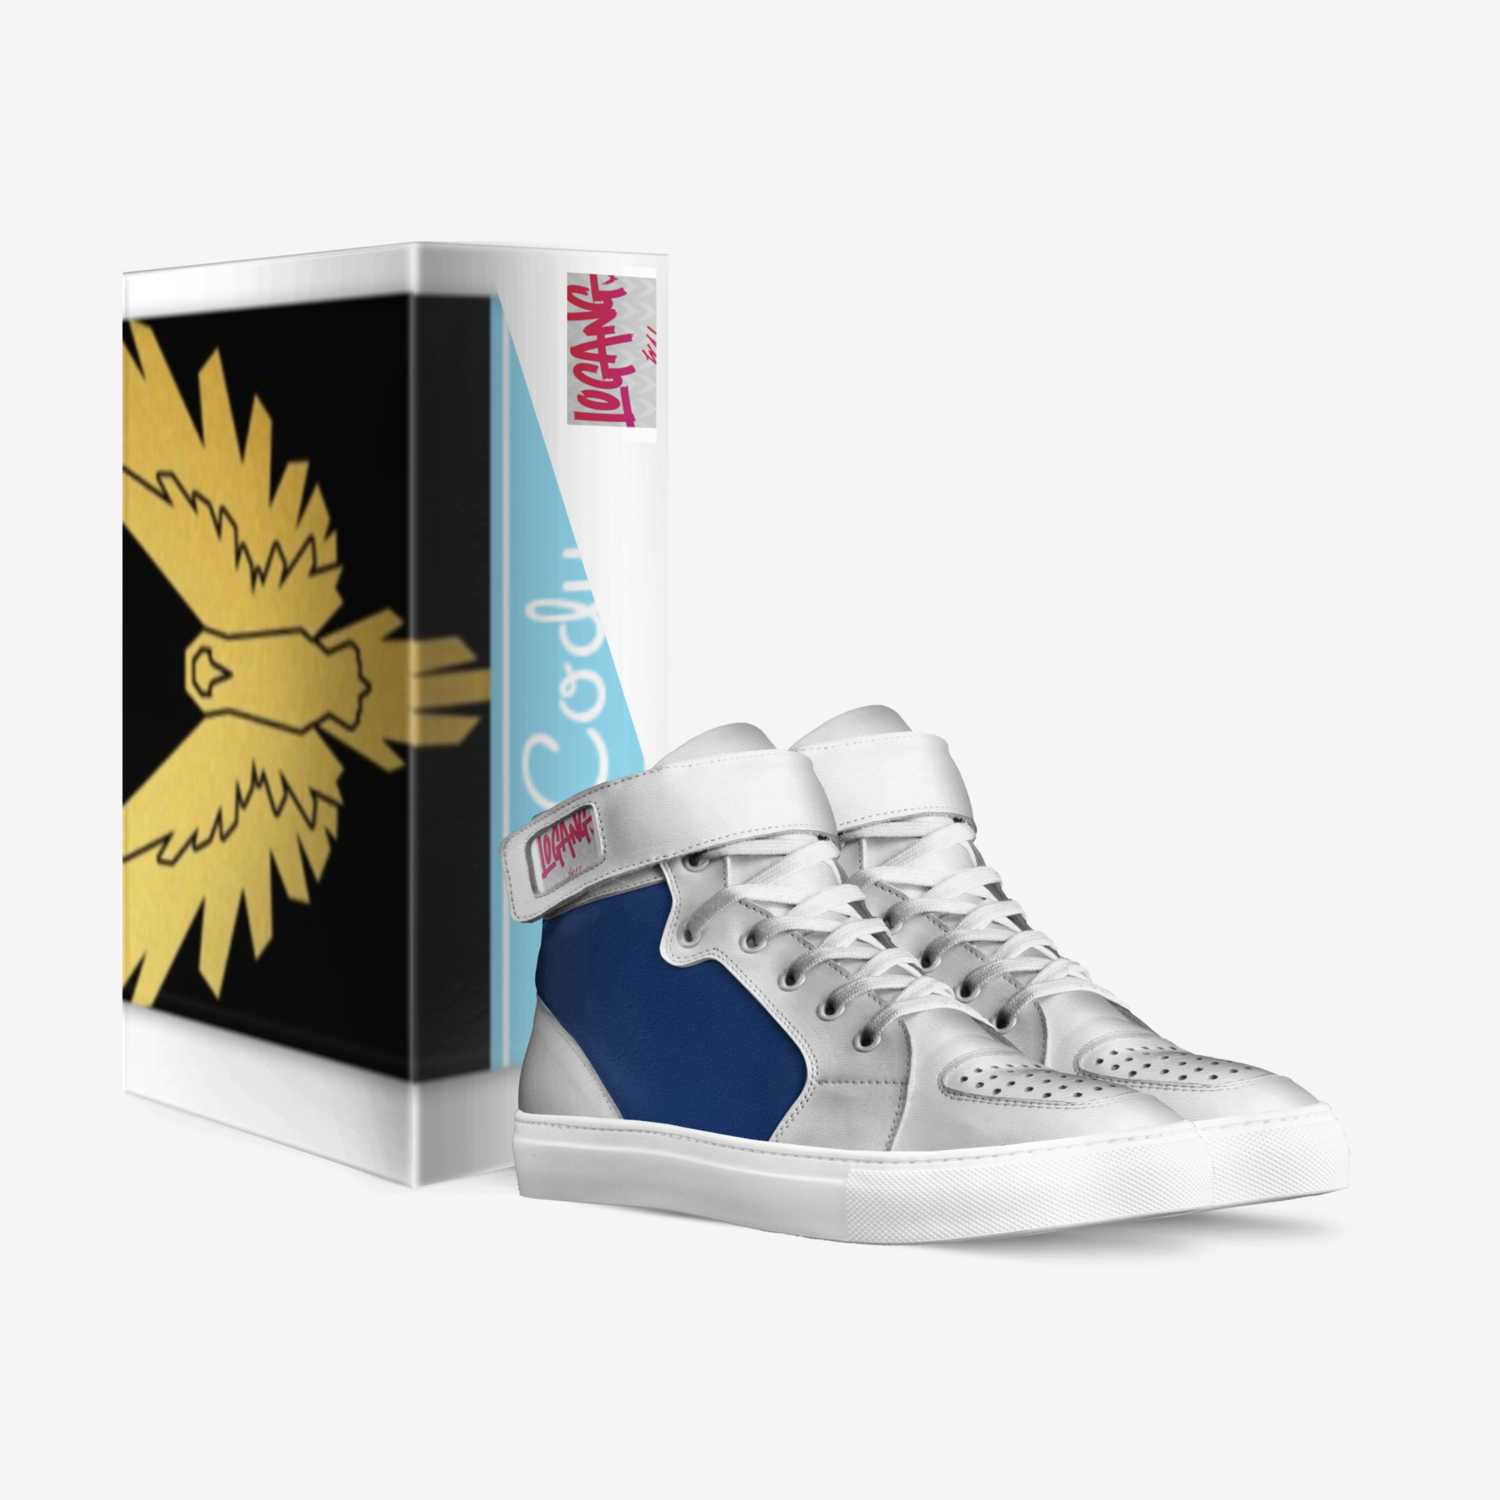 Logan paul custom made in Italy shoes by Codymichealhodges | Box view